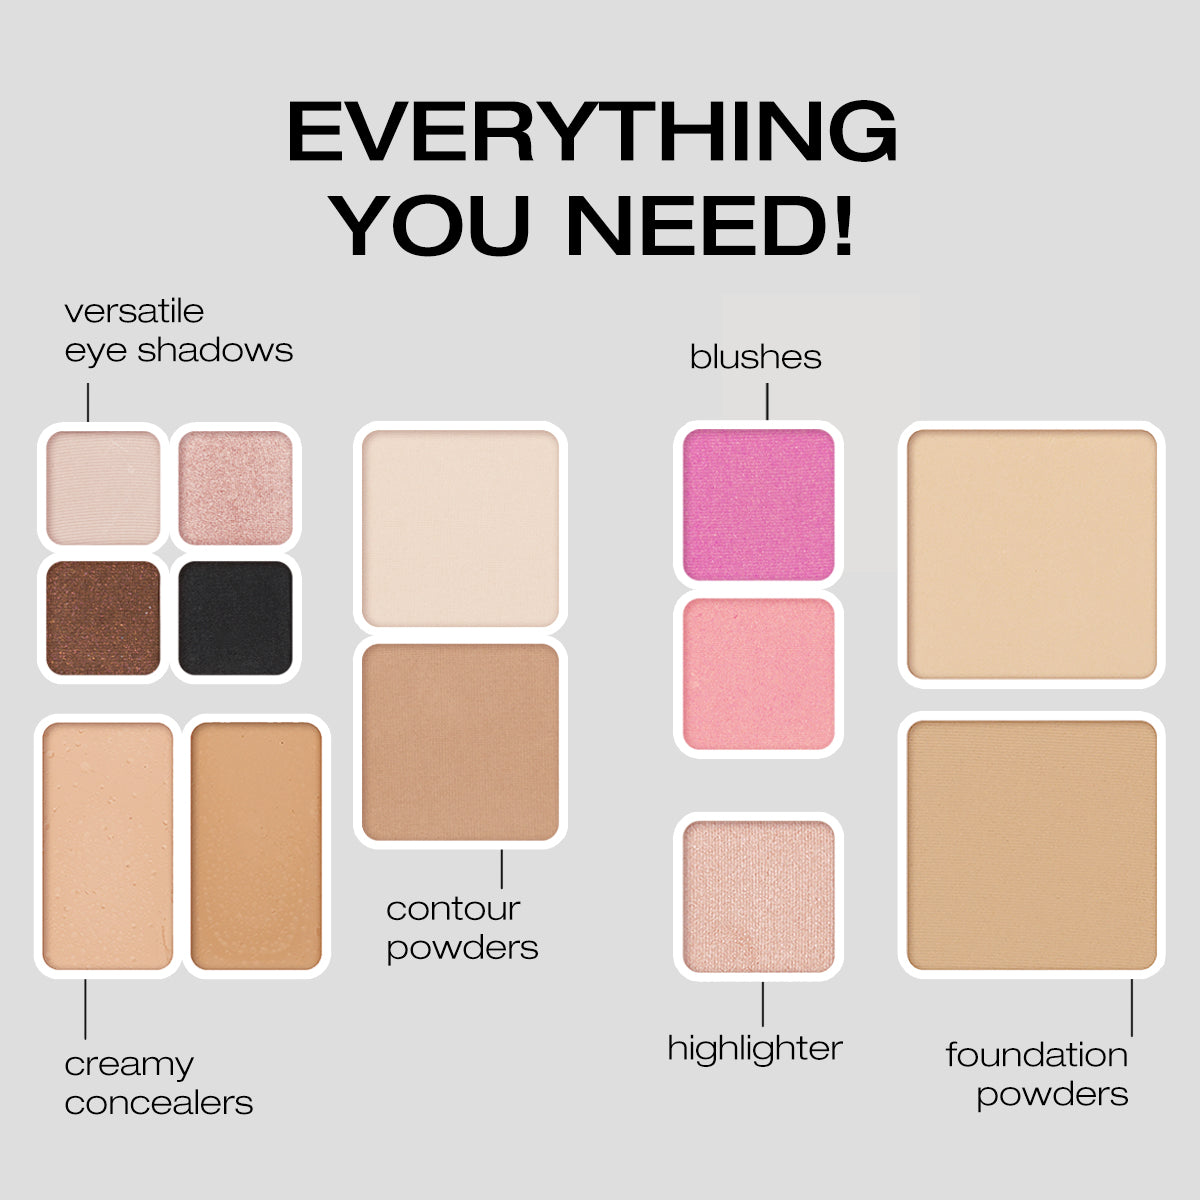 a diagram showing the positions of the 13 cosmetics that are in a Fold Out Face makeup palette, including a quad of 4 eye shadow, 2 cream concealers, 2 contour powders, 2 blushes, 2 foundation powders and 1 shimmering highlighter powder, all curated for a fair skin tone #2 medium light